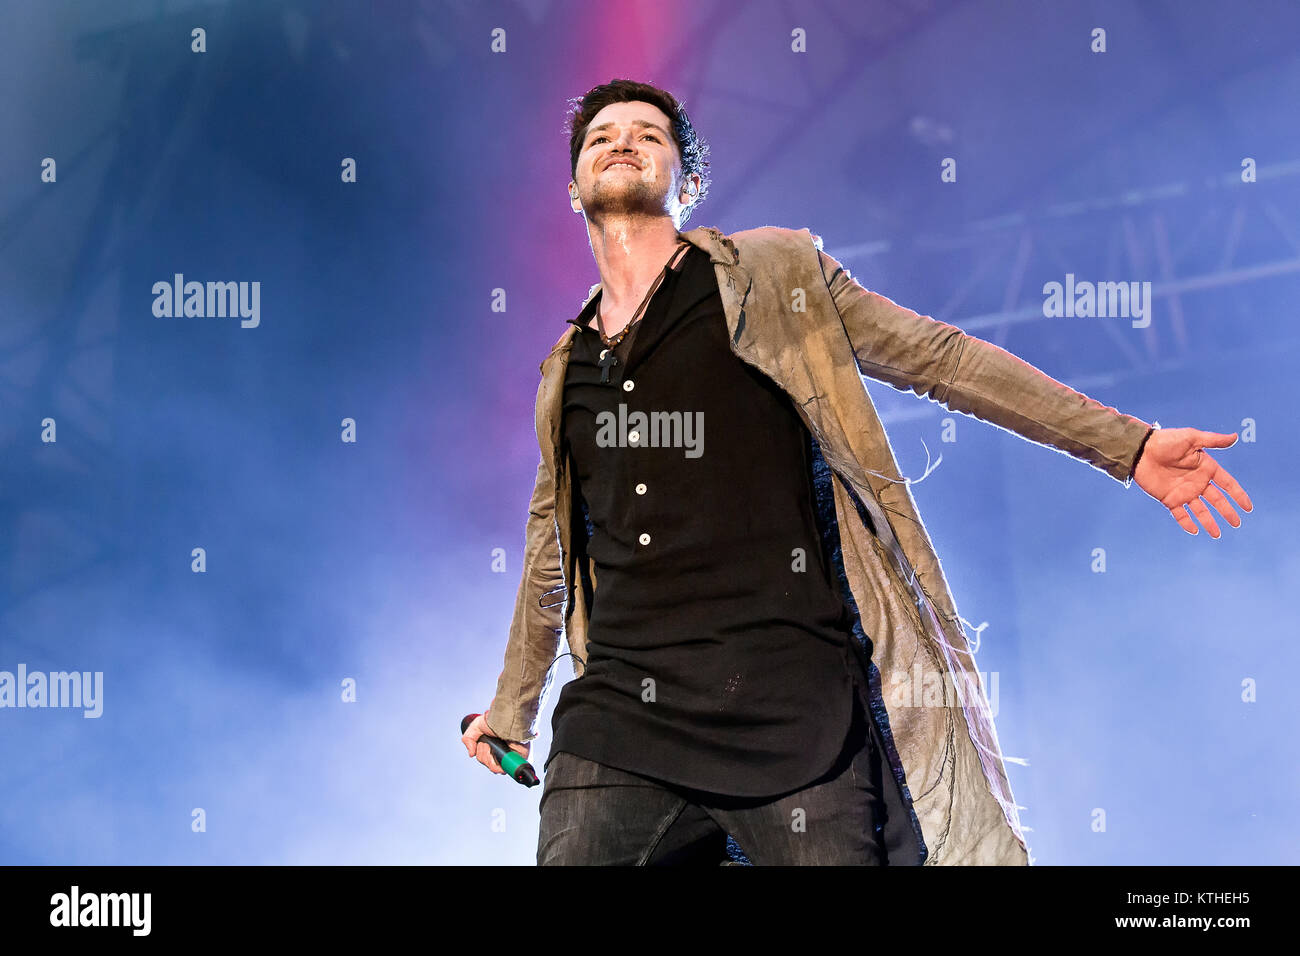 The Irish pop rock band The Script performs a live concert at the Norwegian  music festival Hovefestivalen 2013. Here singer and musician Danny  O'Donoghue is seen live on stage. Norway, 03/07 2013